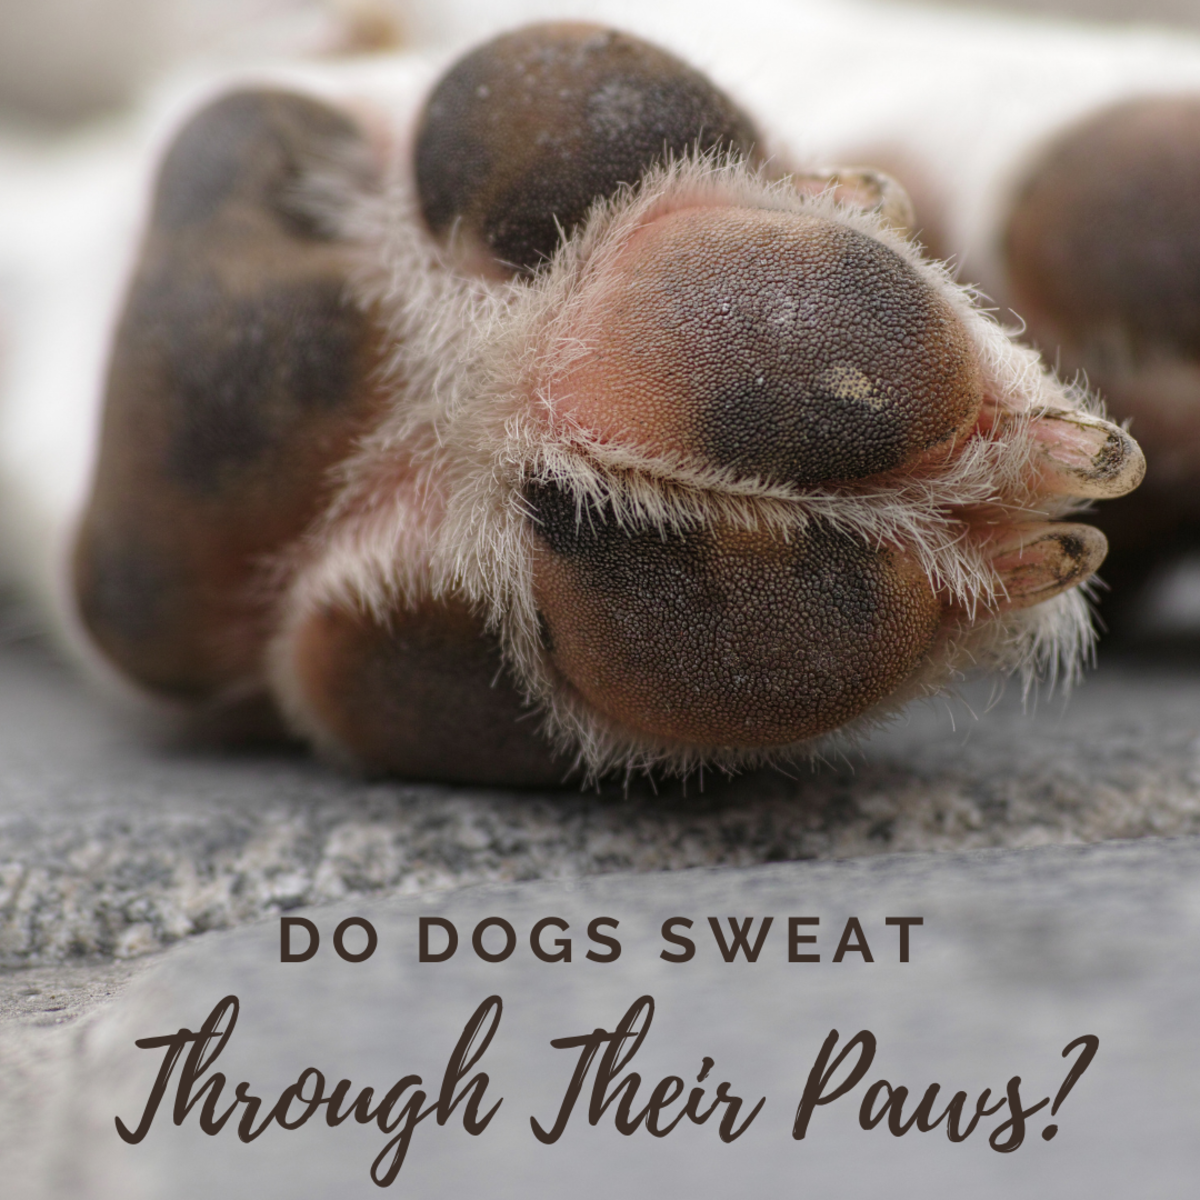 Why does my dog have sweat glands on his paw pads?